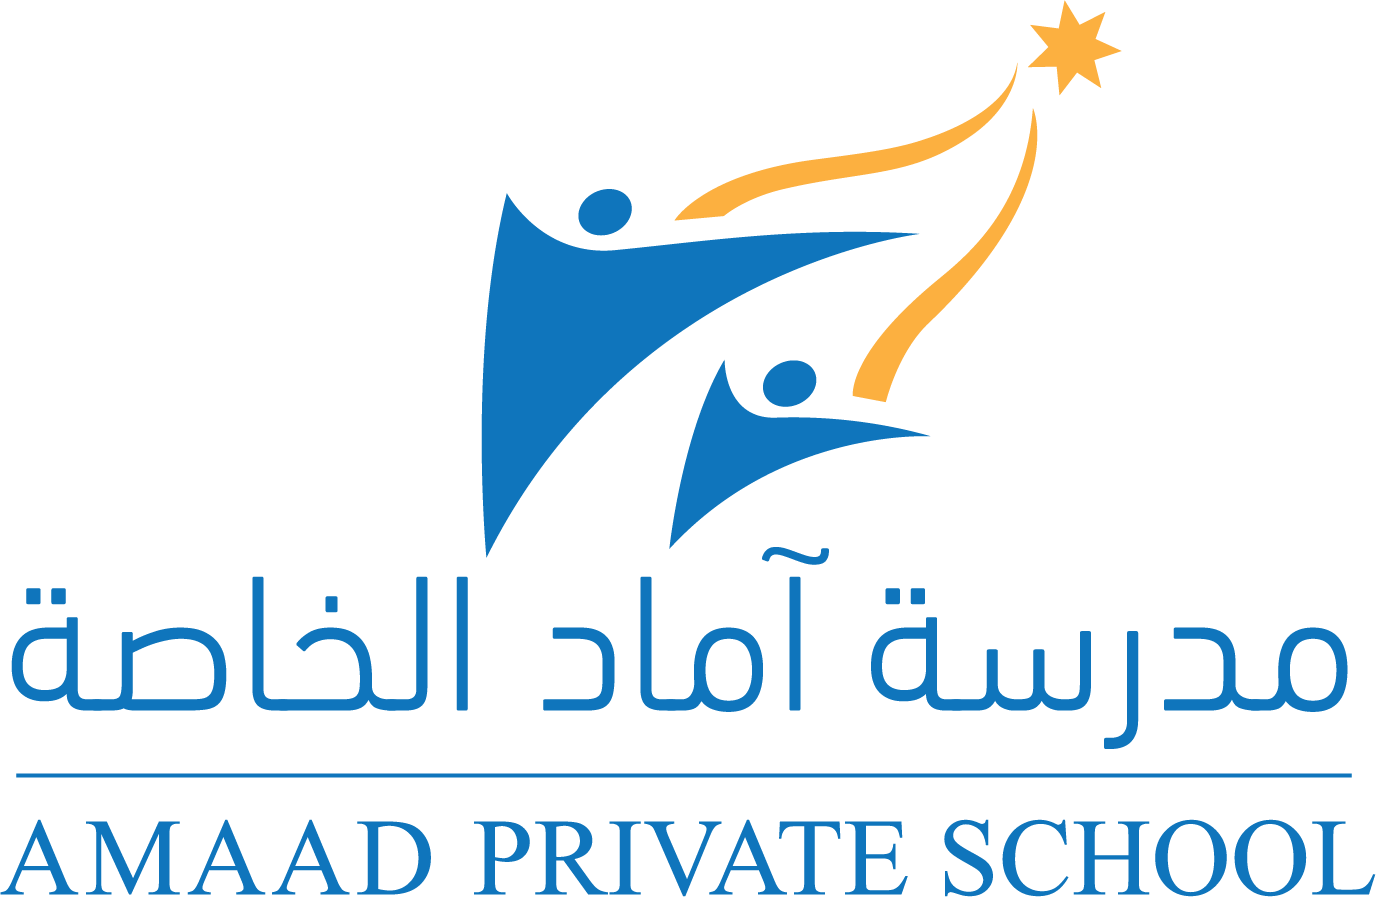 Amaad Private School